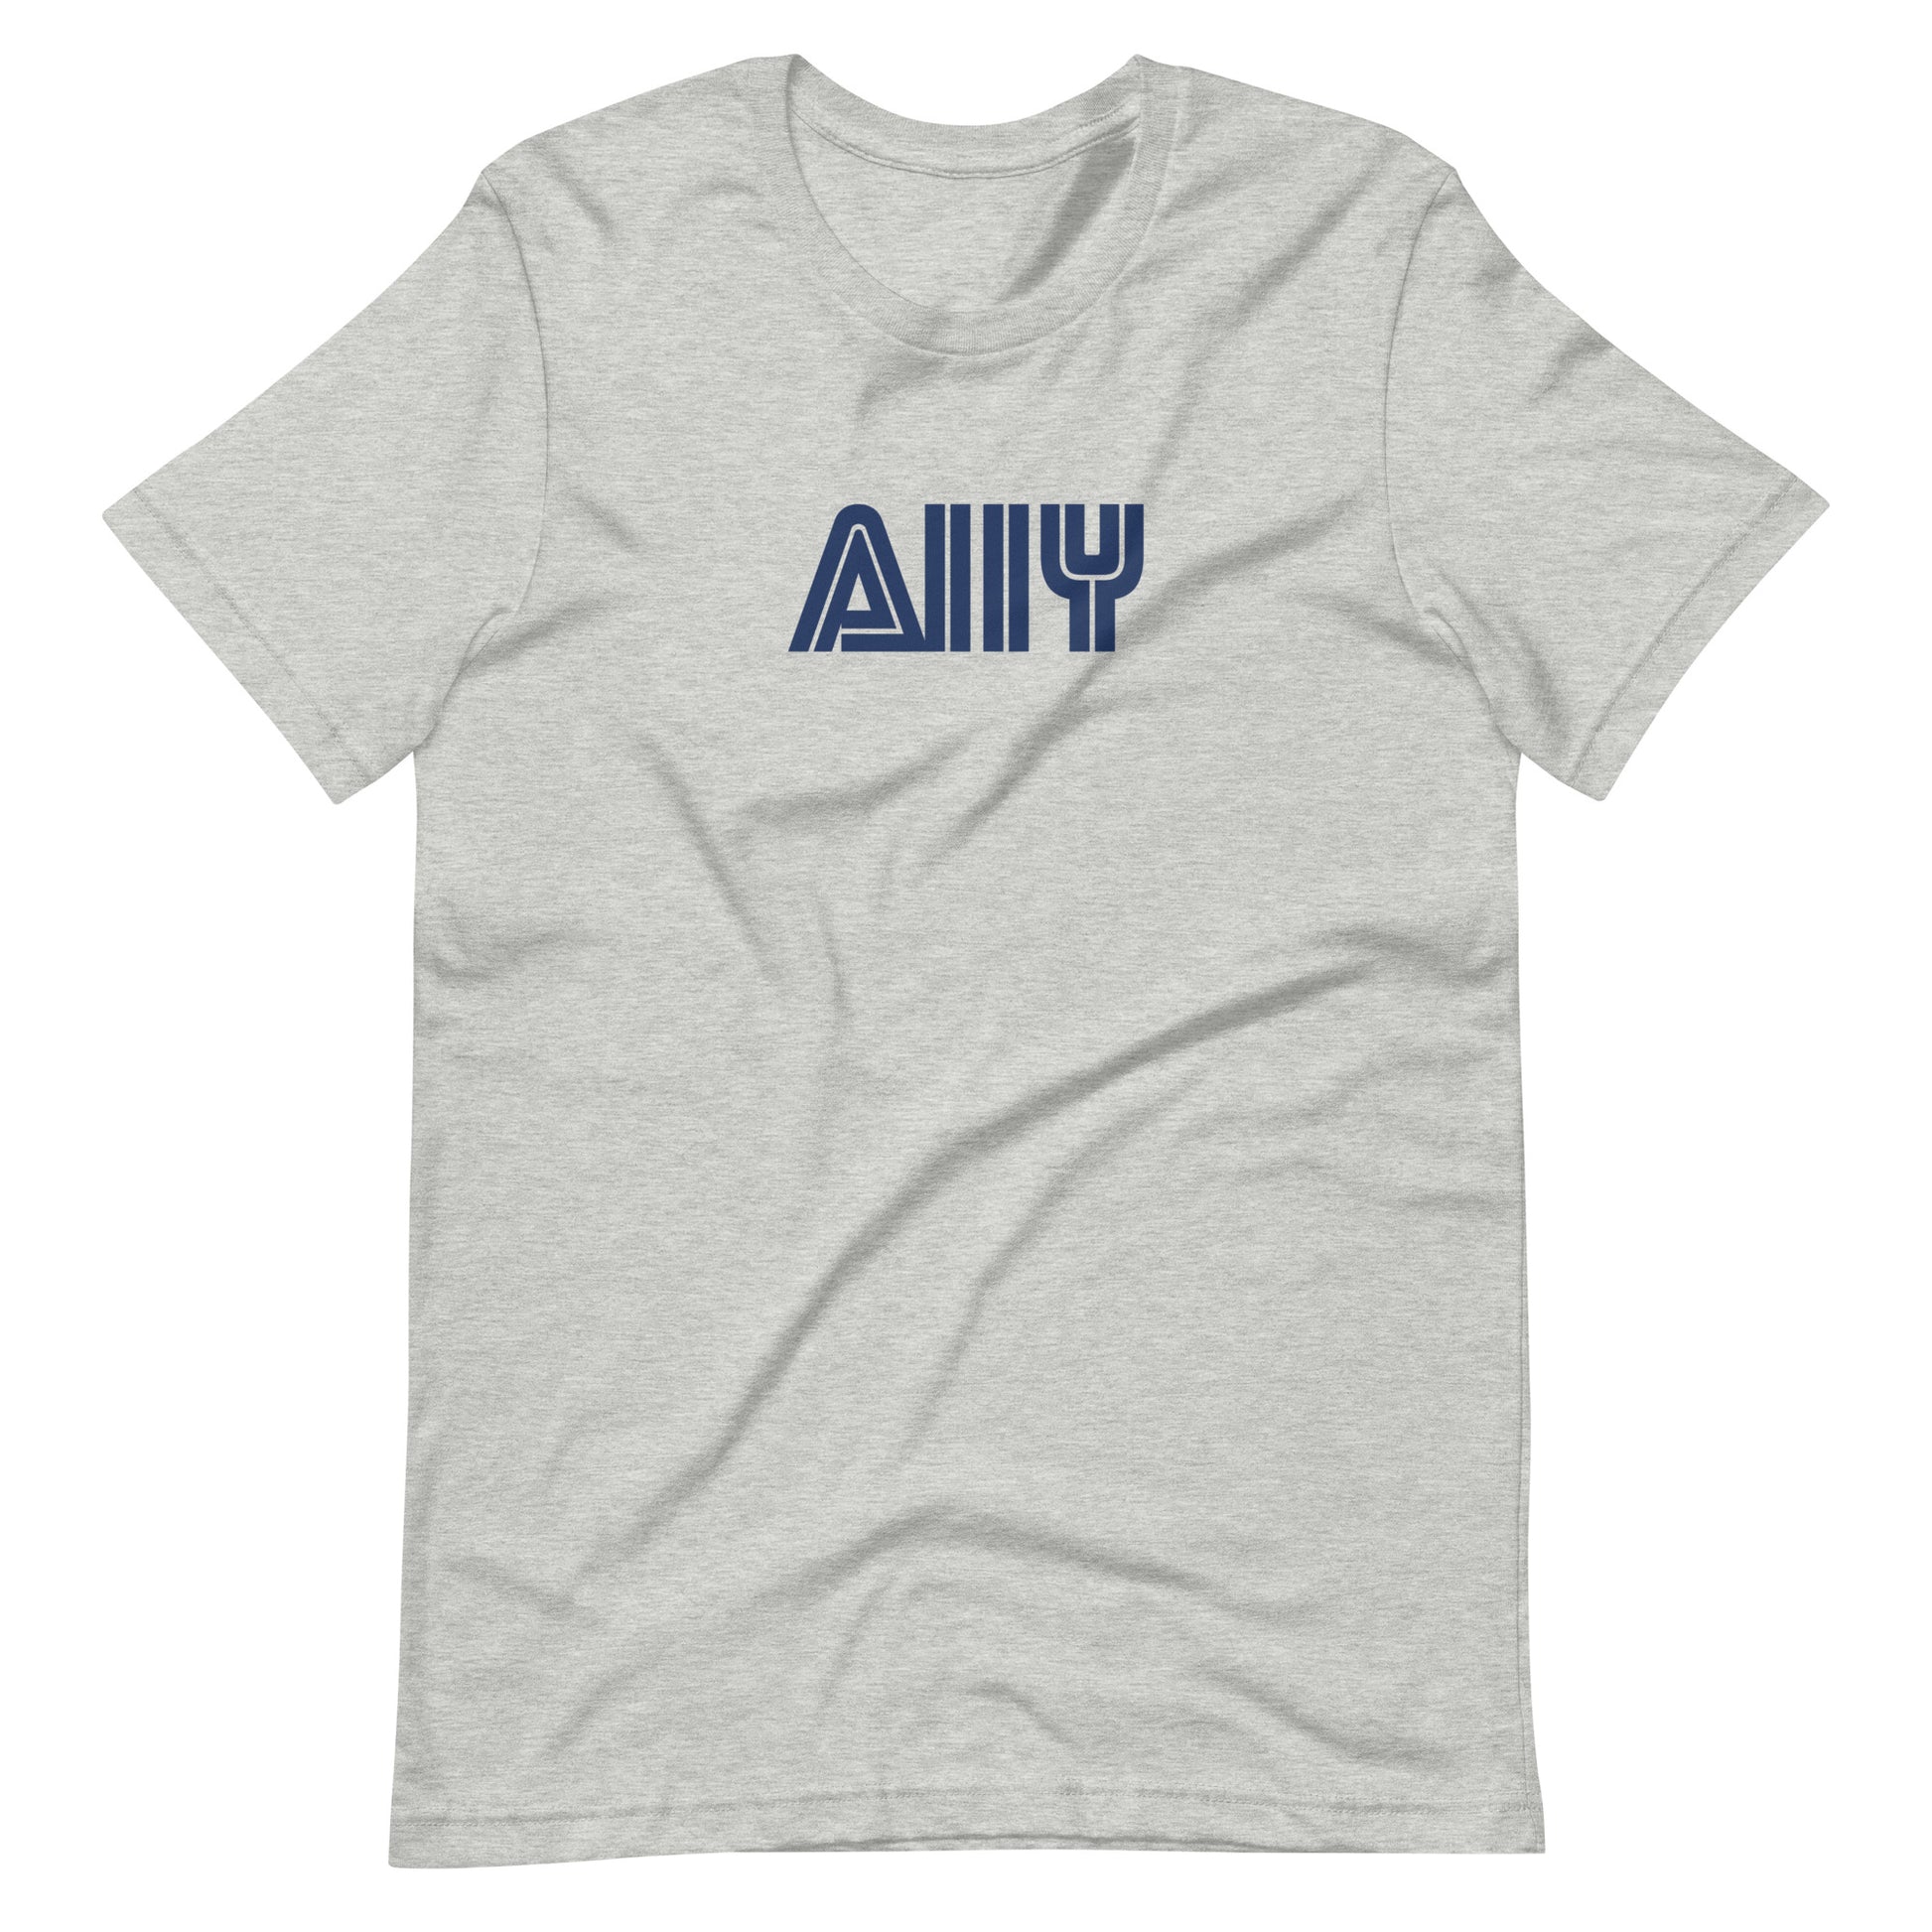 Blue stylized A11y letters, prepresentative of the Sega logo, center aligned, on front of heather grey t-shirt.